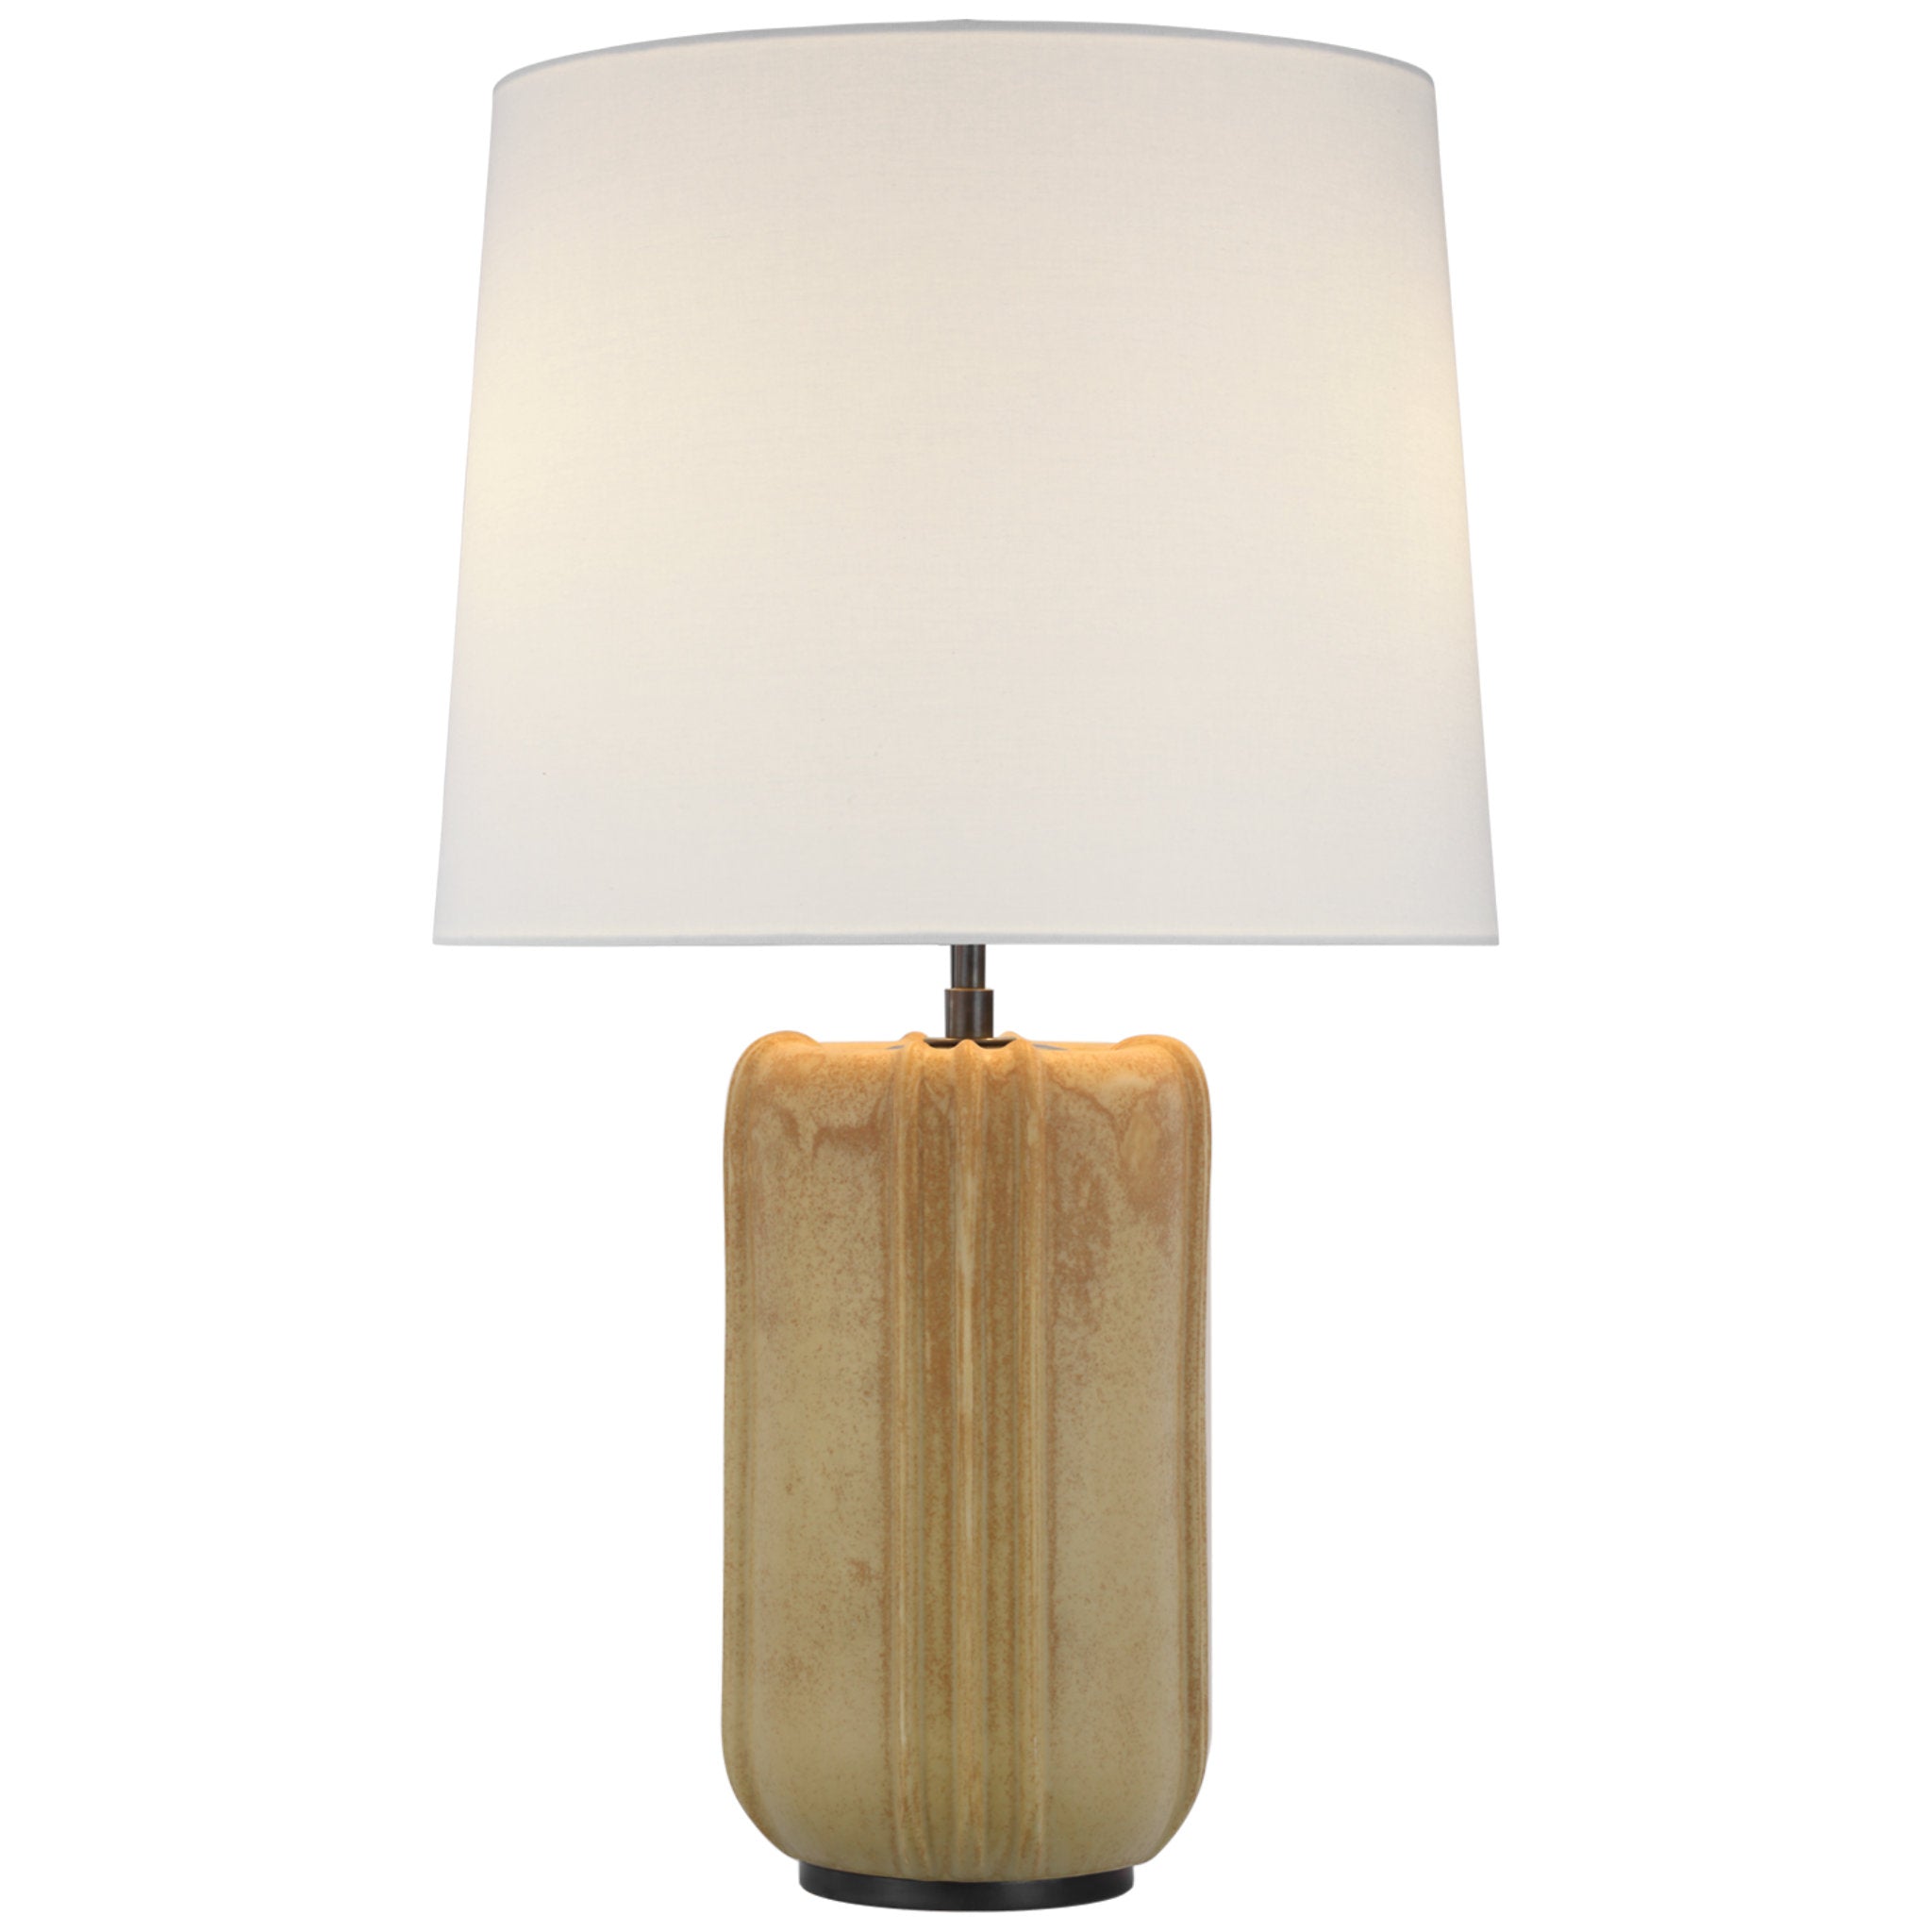 Thomas O'Brien Minx Large Table Lamp in Yellow Oxide with Linen Shade